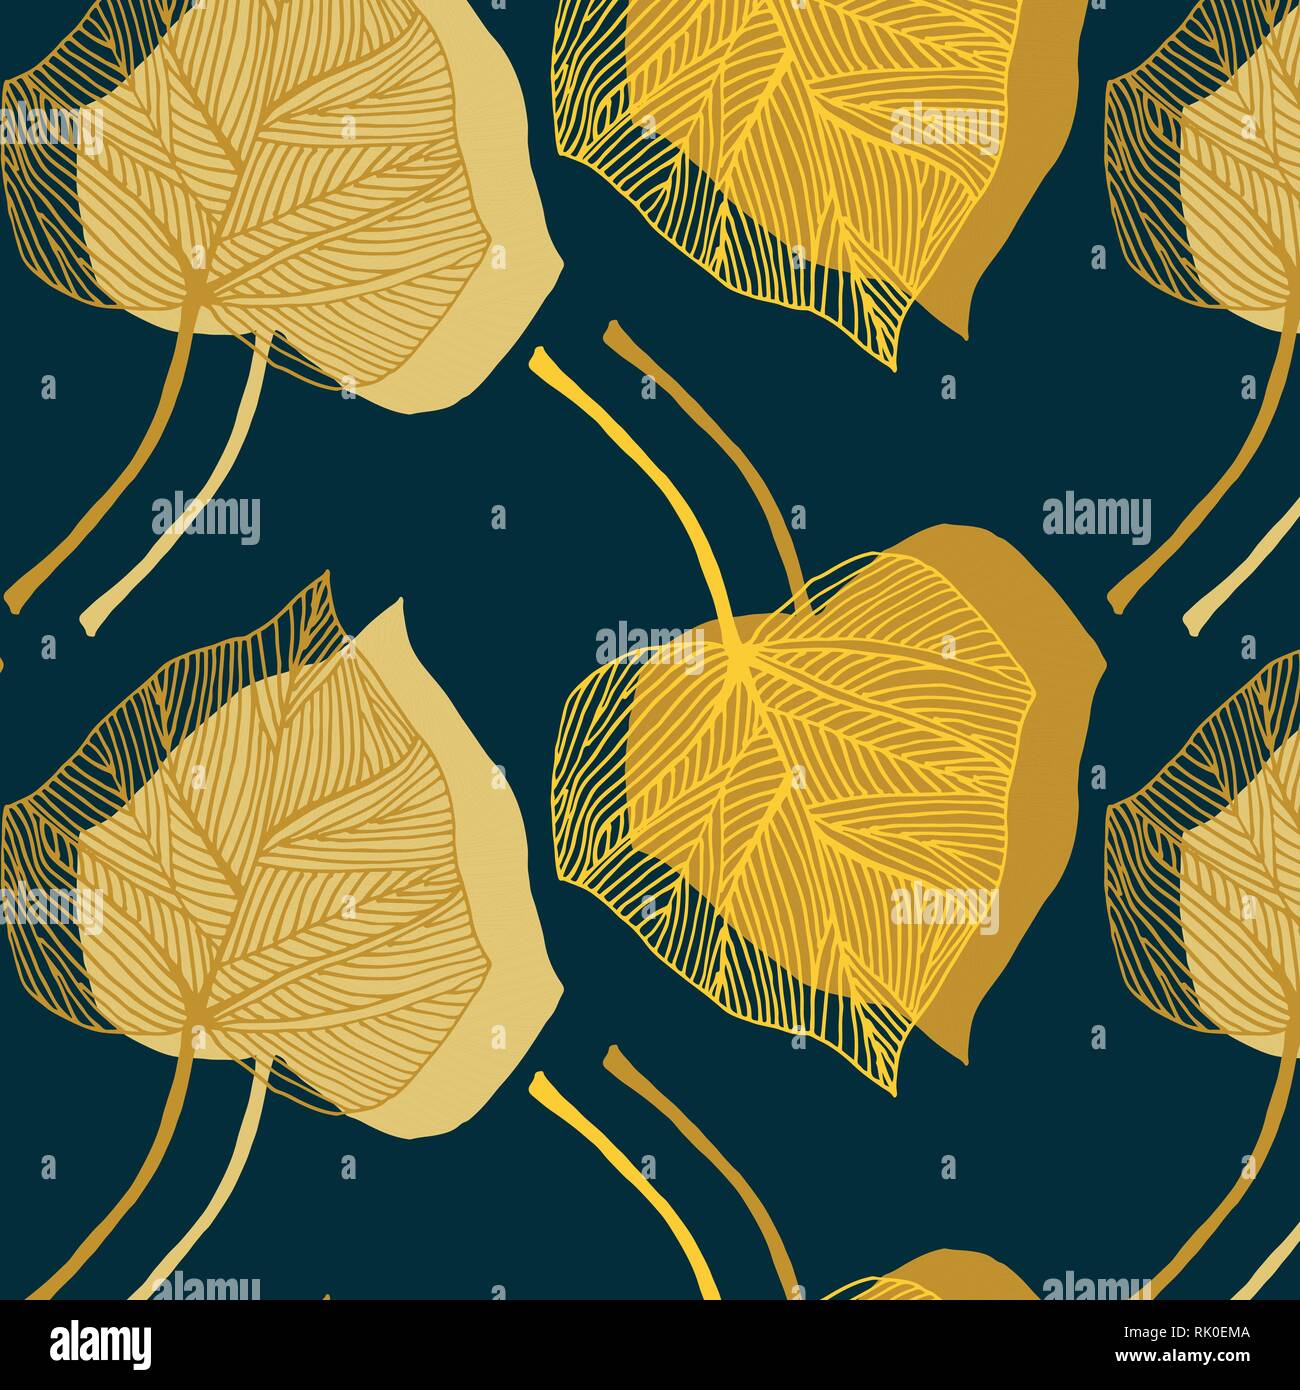 Hand drawn Ivy leaves autumn vector pattern in yellow, orange and dark blue colors palette Stock Vector